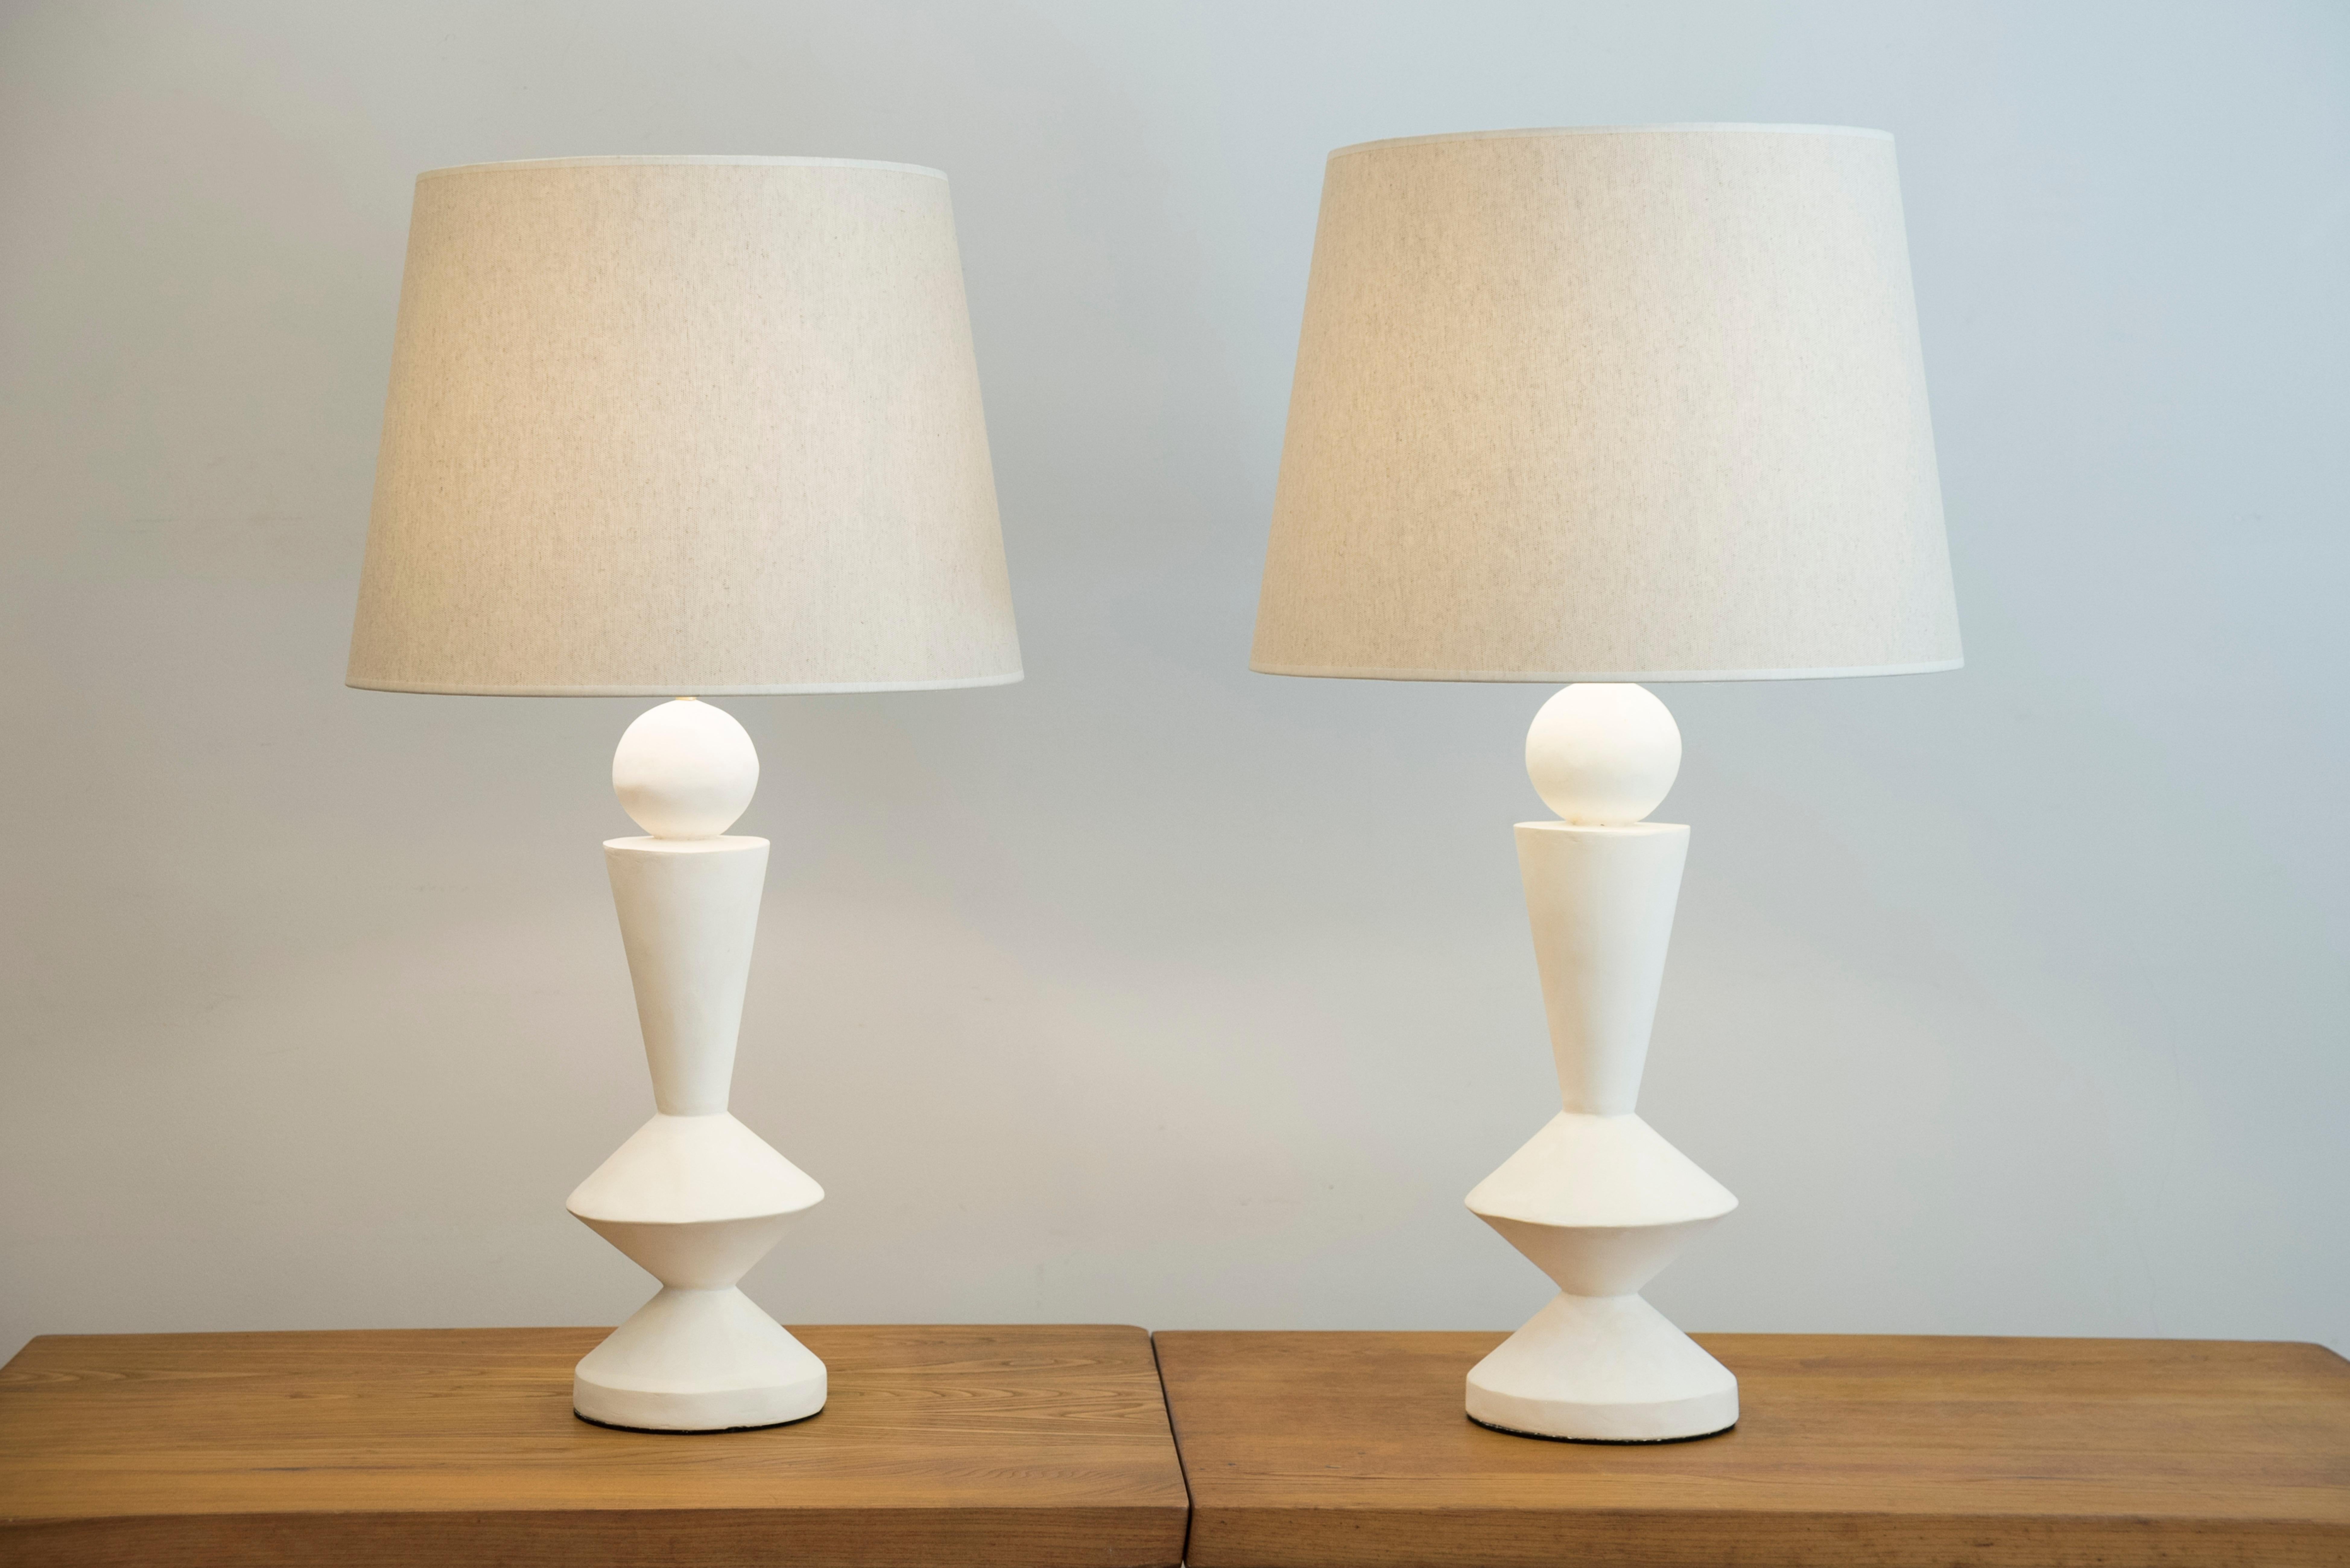 Pair of stuccoed plaster lamps
Inspired by Jean-Michel Frank
France, modern production

Measures: Height total 84 cm
Height plaster foot 48 cm
Diameter (shade) 46 cm.